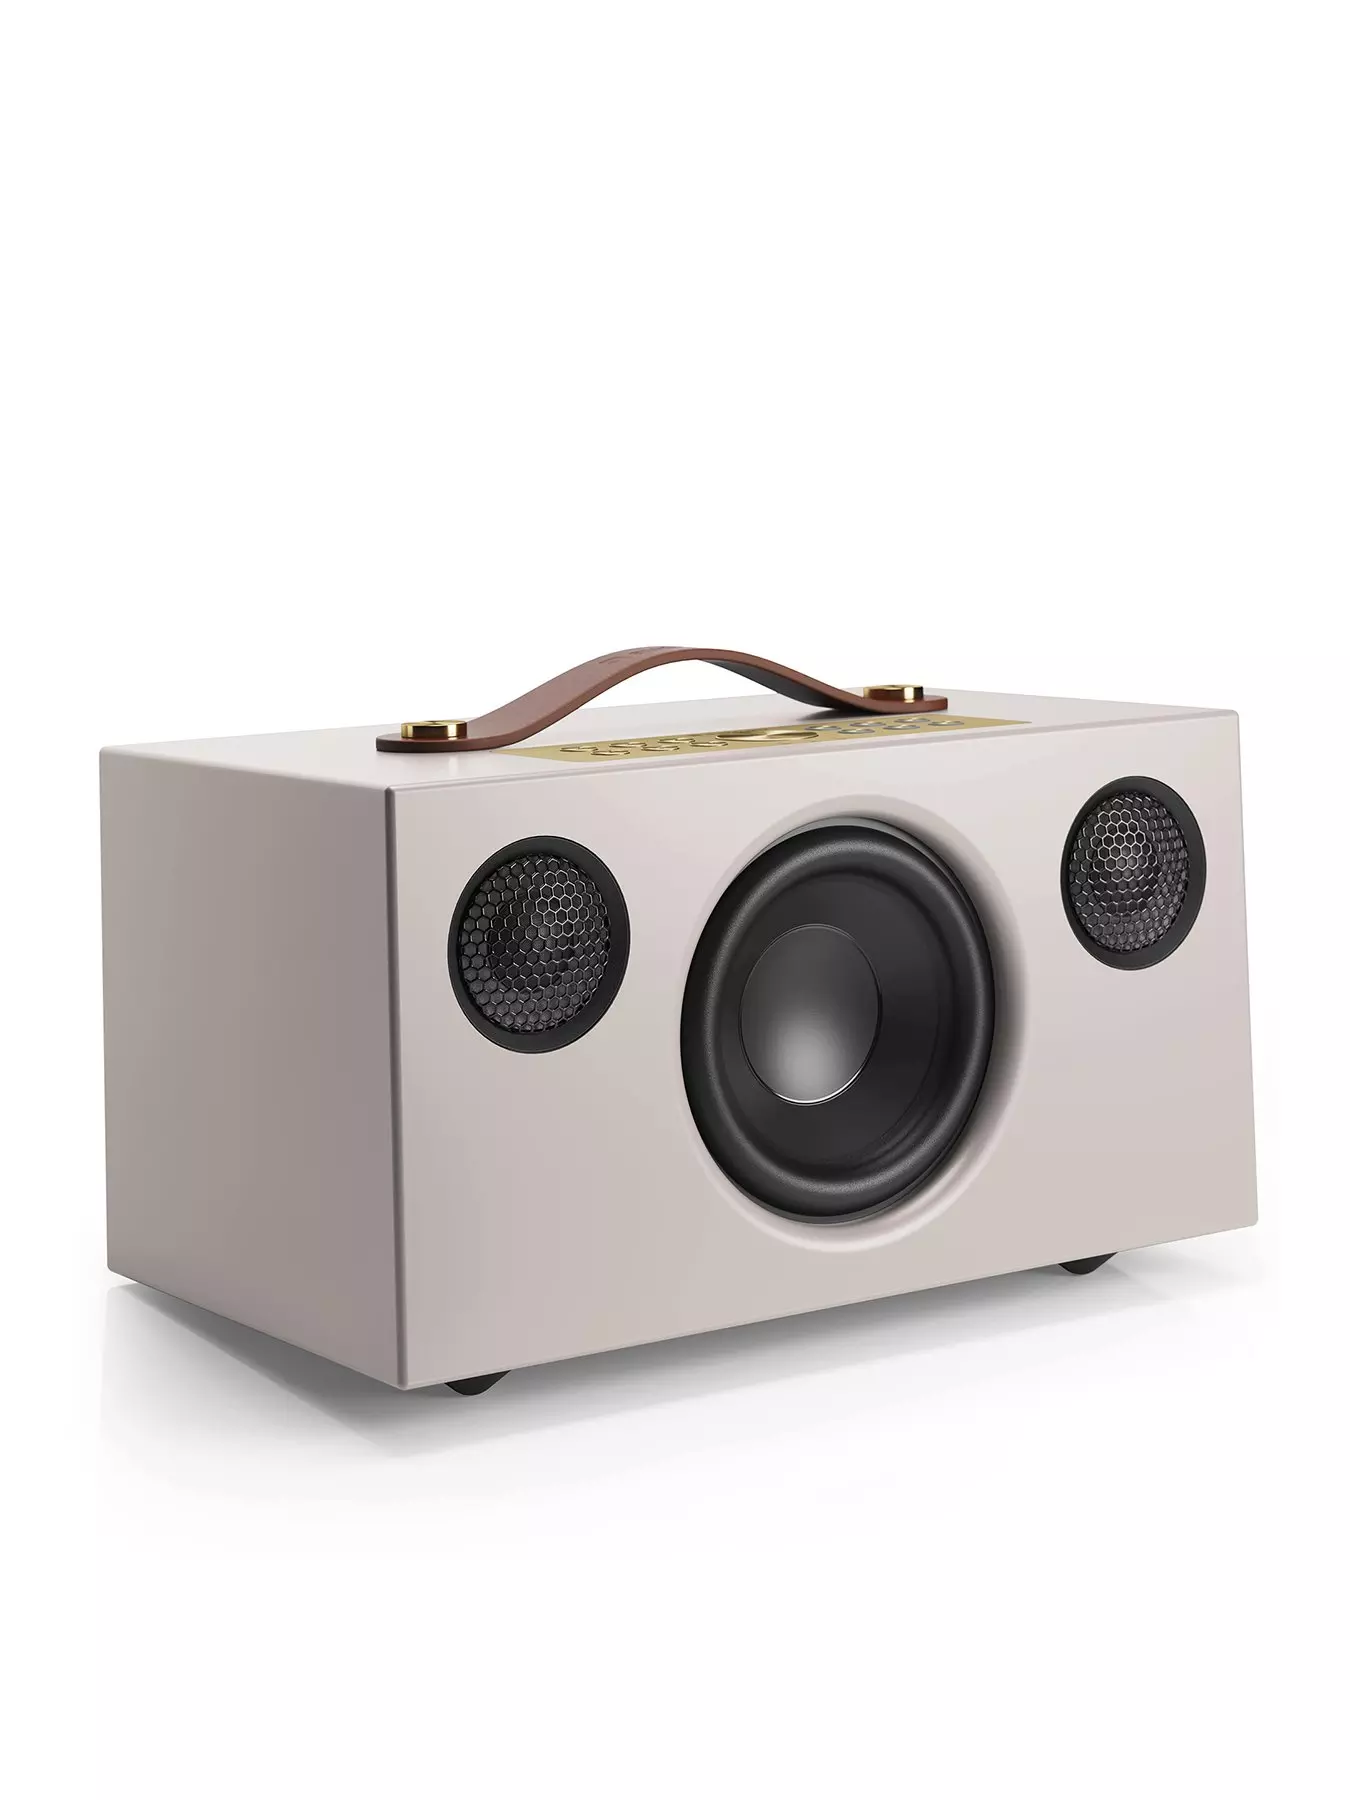 Review: The Vava VOOM 21 Bluetooth Speaker - A Compact Sound Powerhouse